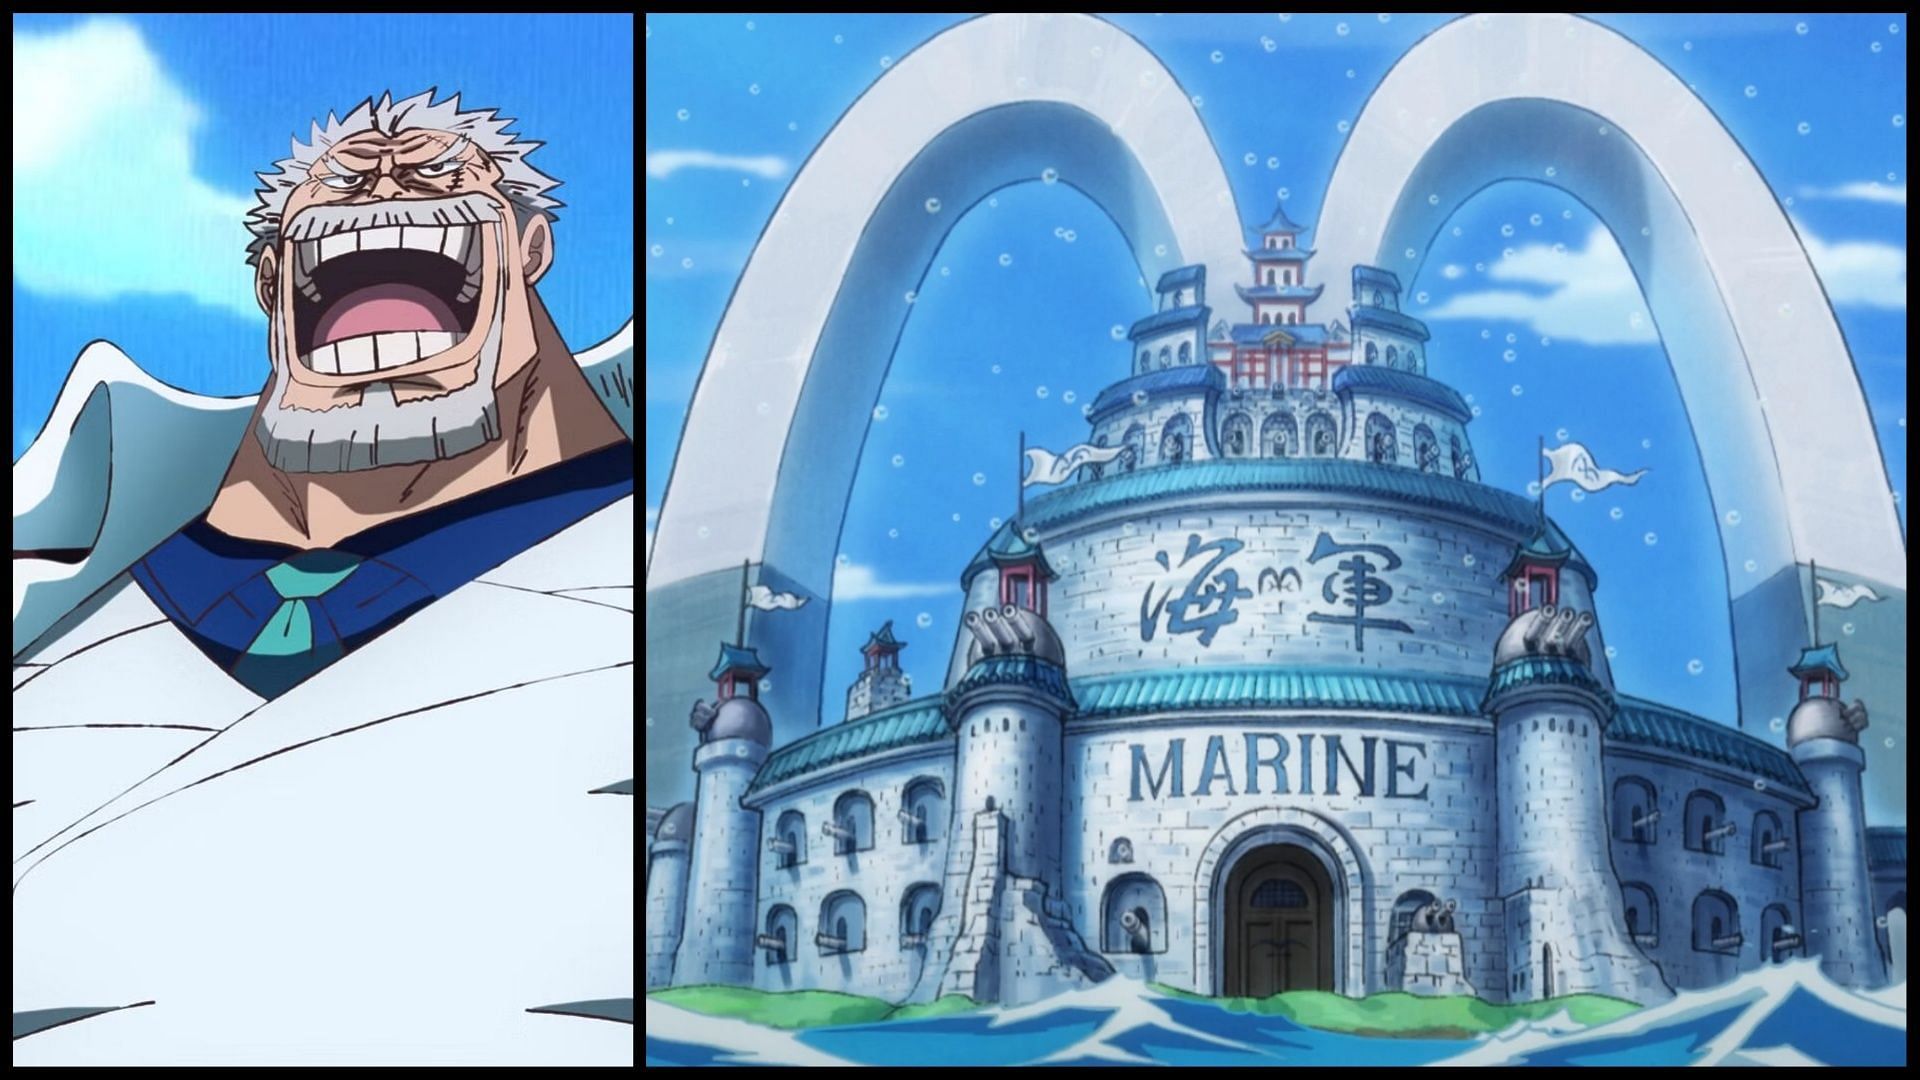 Despite SWORD members being expendable, it seems that the Marines are coming to Garp